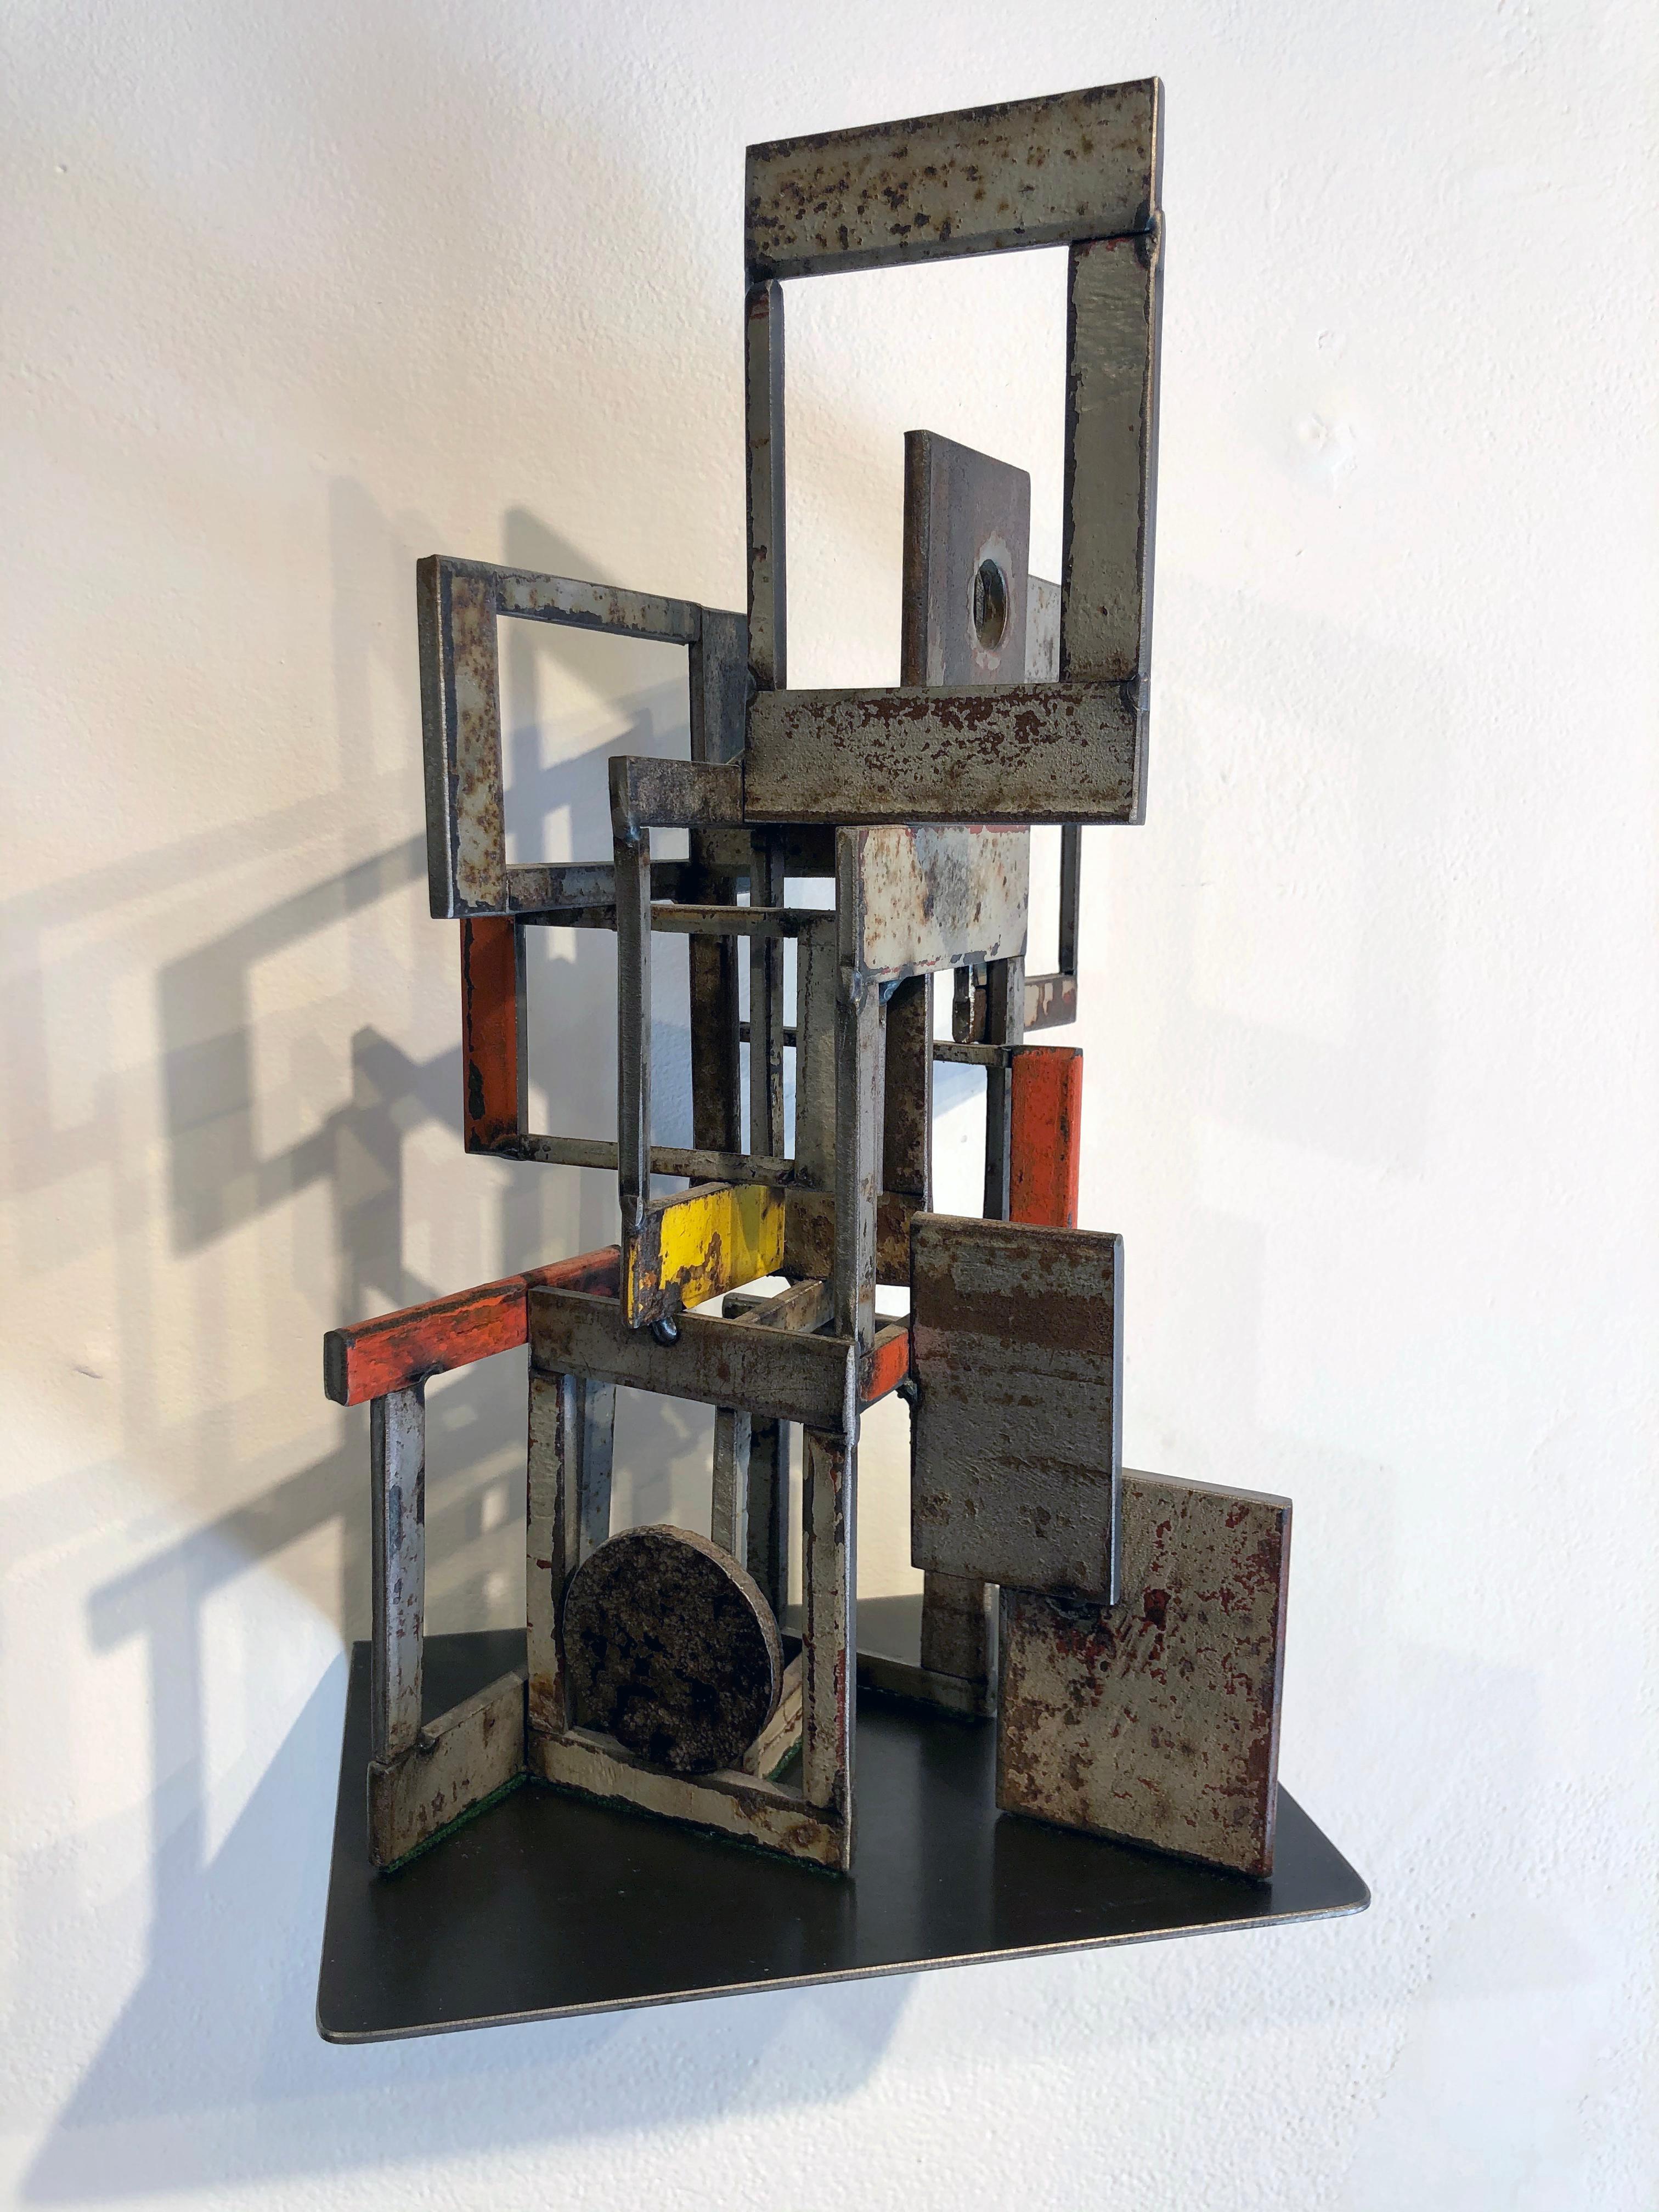 Object 1978, Steel Structure, Welded Sculptural Object Made w/ Salvaged Steel 2